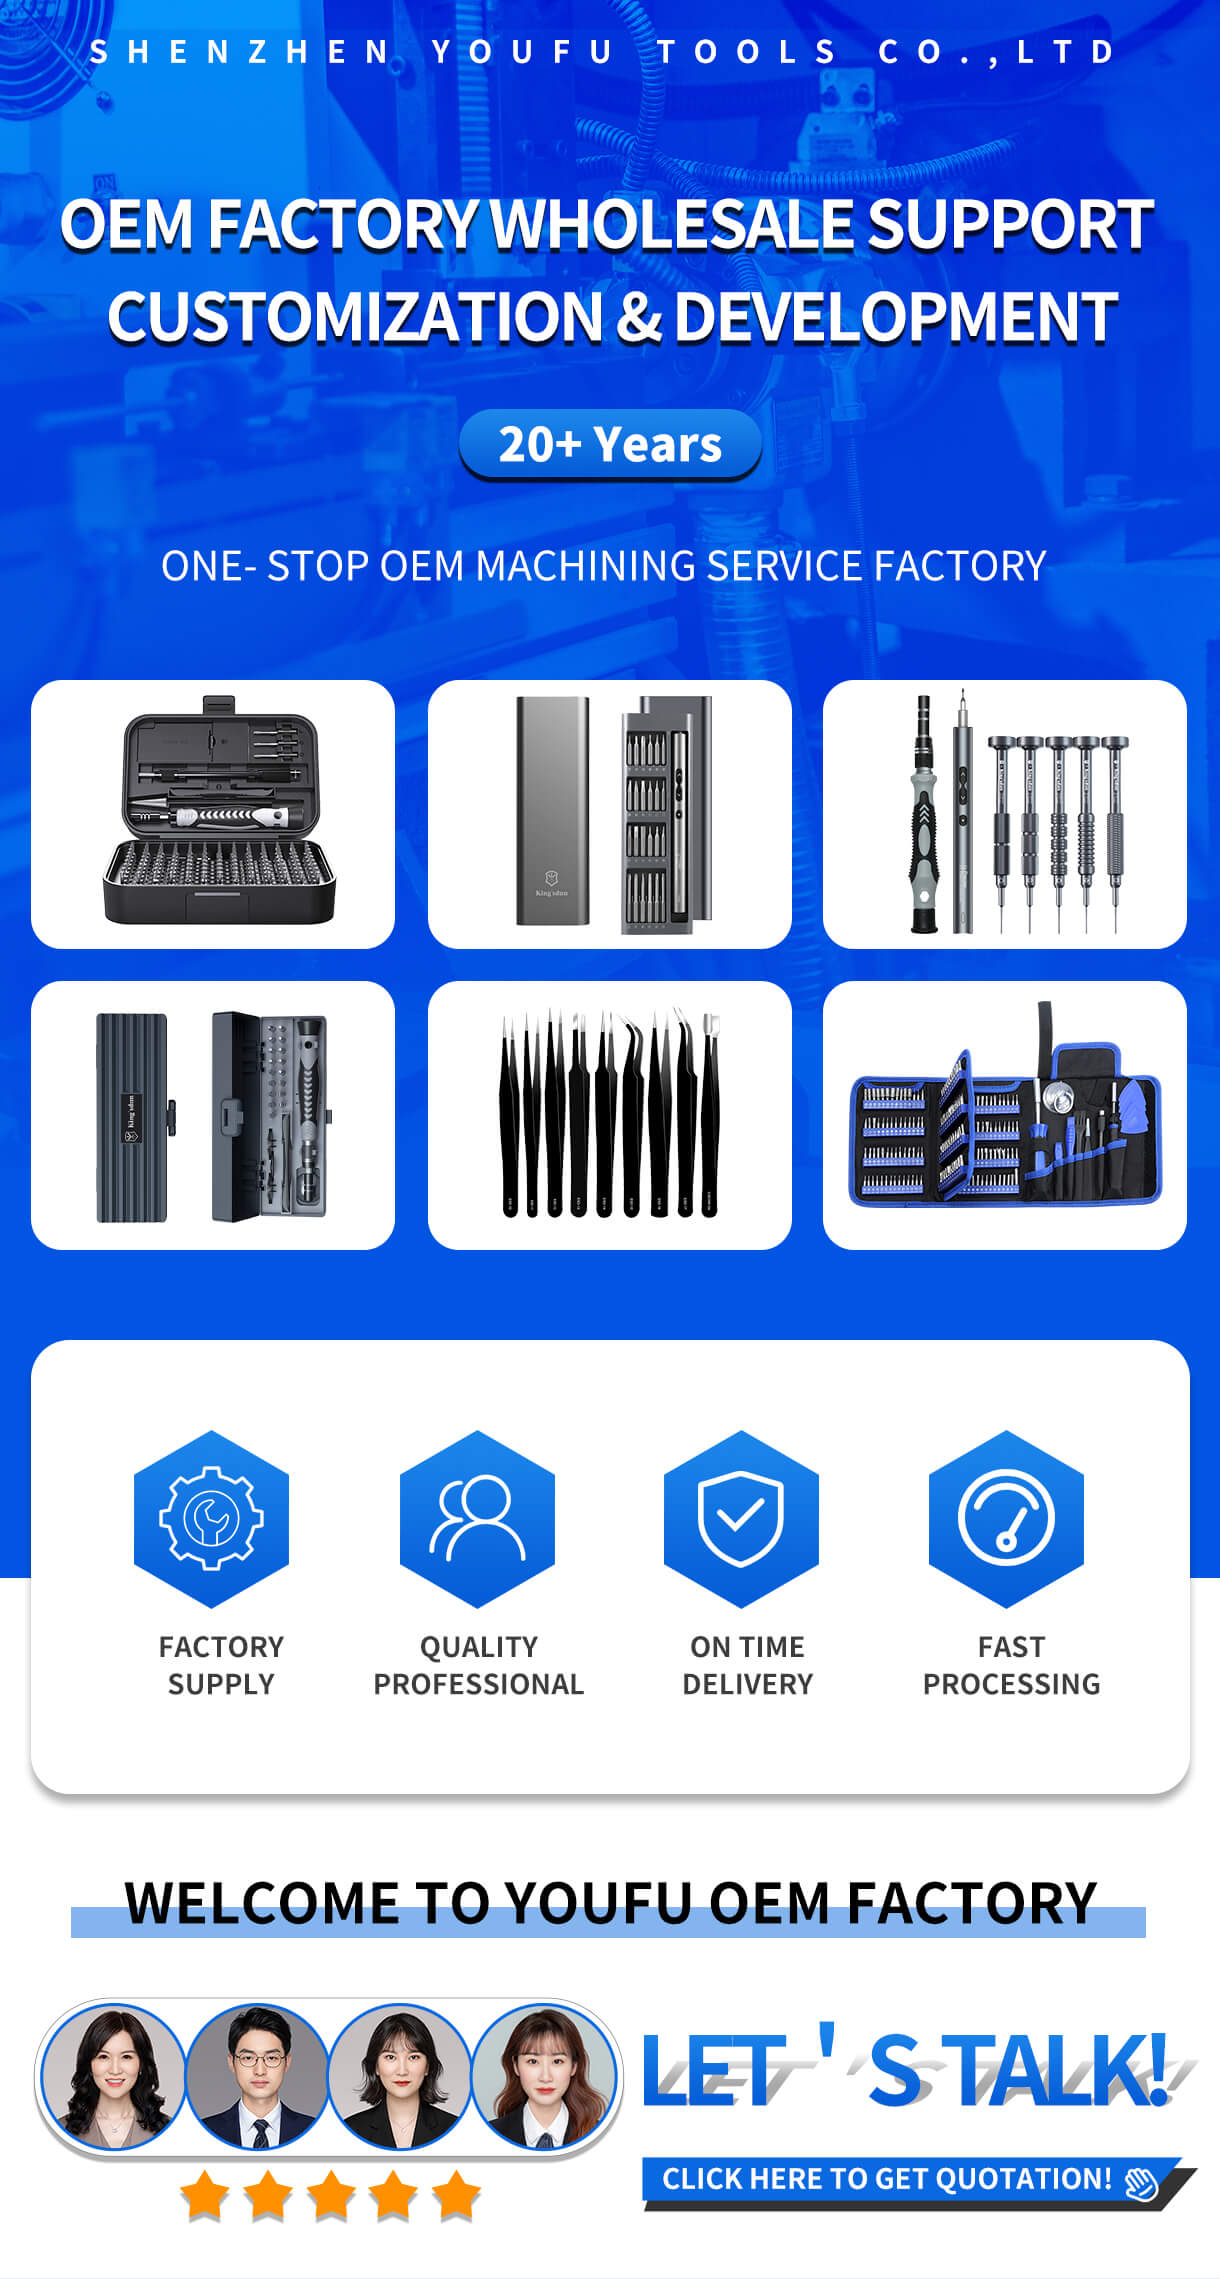 Looking for Screwdriver Set Manufacturers or Repair Tools Kit Wholesalers? YouFu is One of the Best Screwdriver Set Suppliers. Choose a Wide Selection of Repair Tool Sets Here!